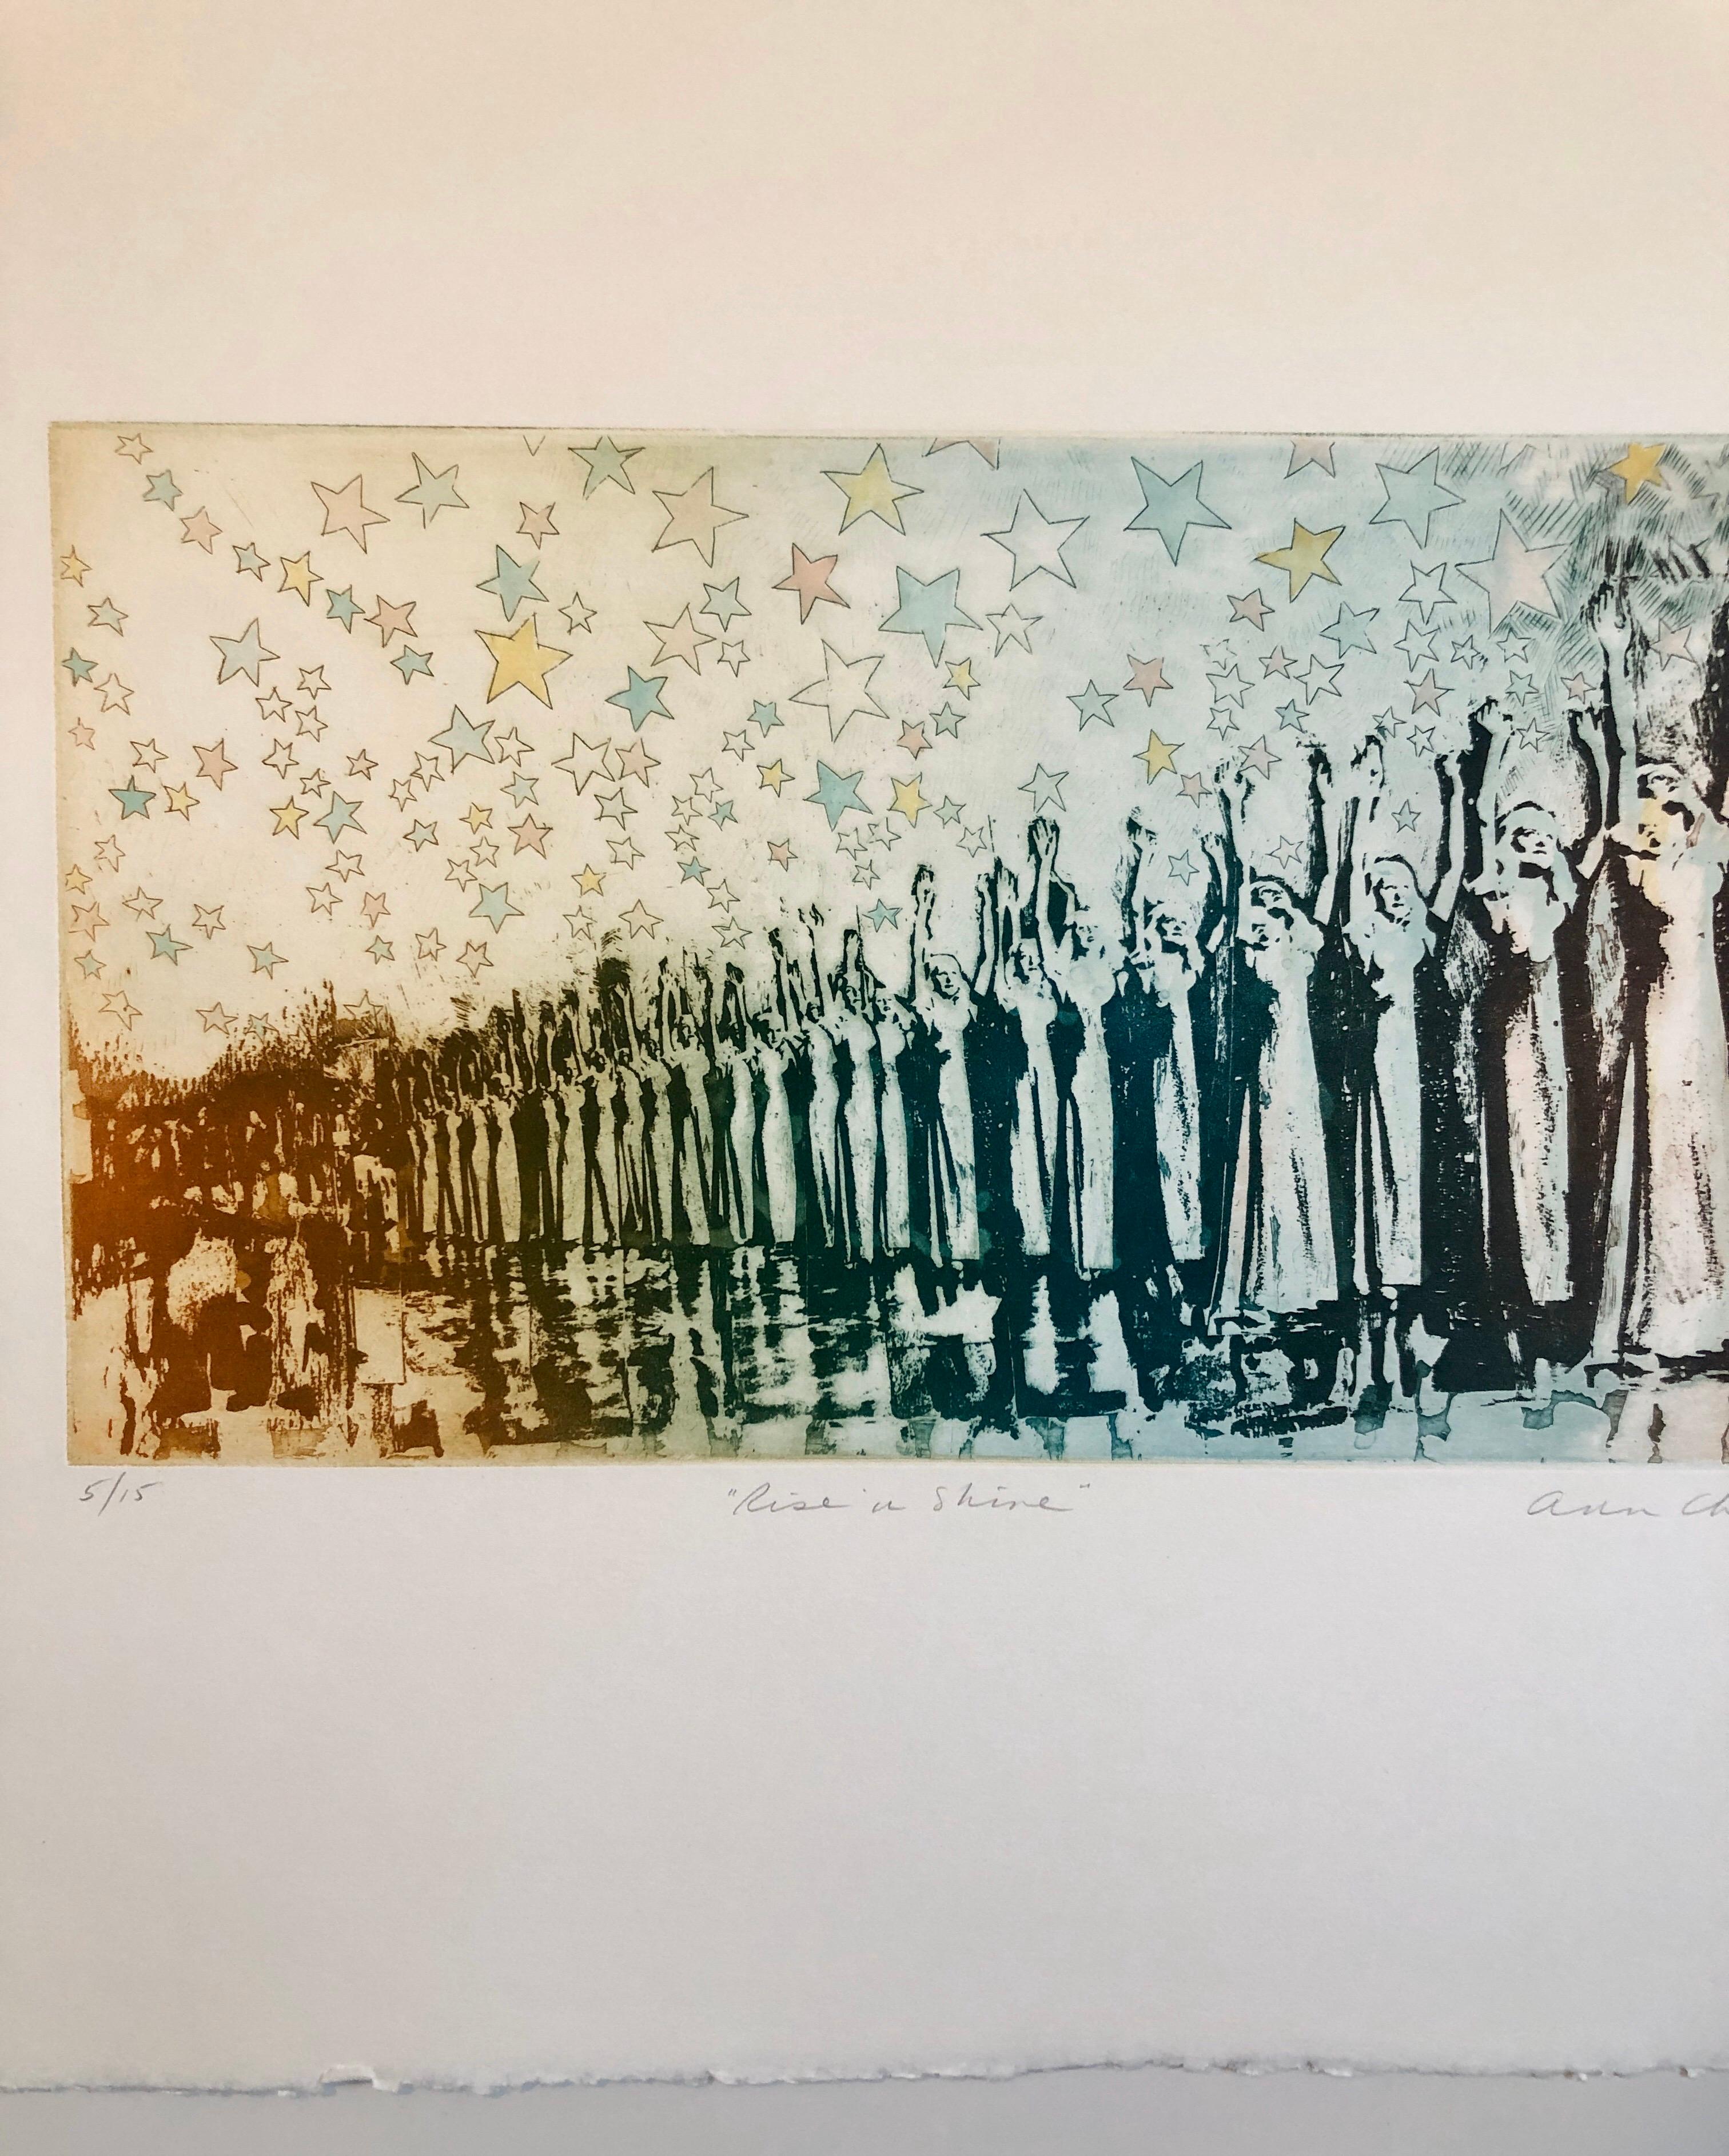 Titled: Rise n Shine
Ann Chernow (Connecticut b. 1936) etching. hand signed 'Ann Chernow' in pencil lower right. Numbered '5/15' in pencil lower left. Titled in pencil lower center. Sheet measures 18-in. x 24-in. 
Image is smaller. please see